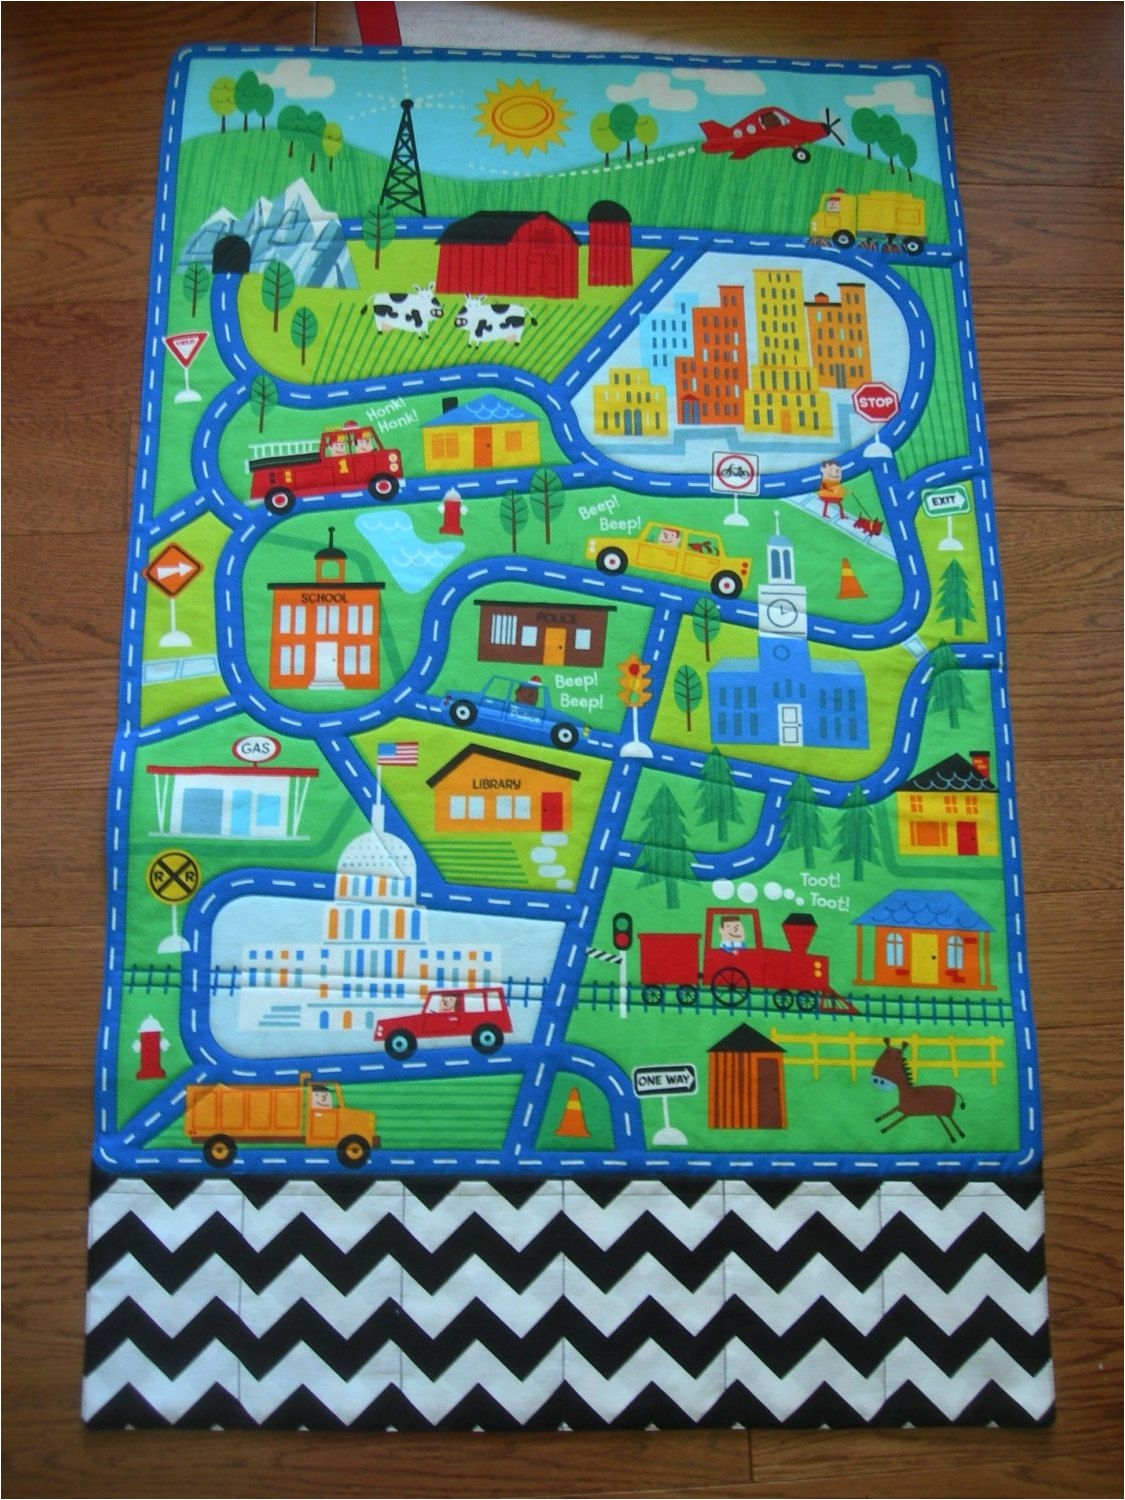 this large quilted play mat of a town scene will provide hours of fun for any special little boy or girl this car play mat with roads and